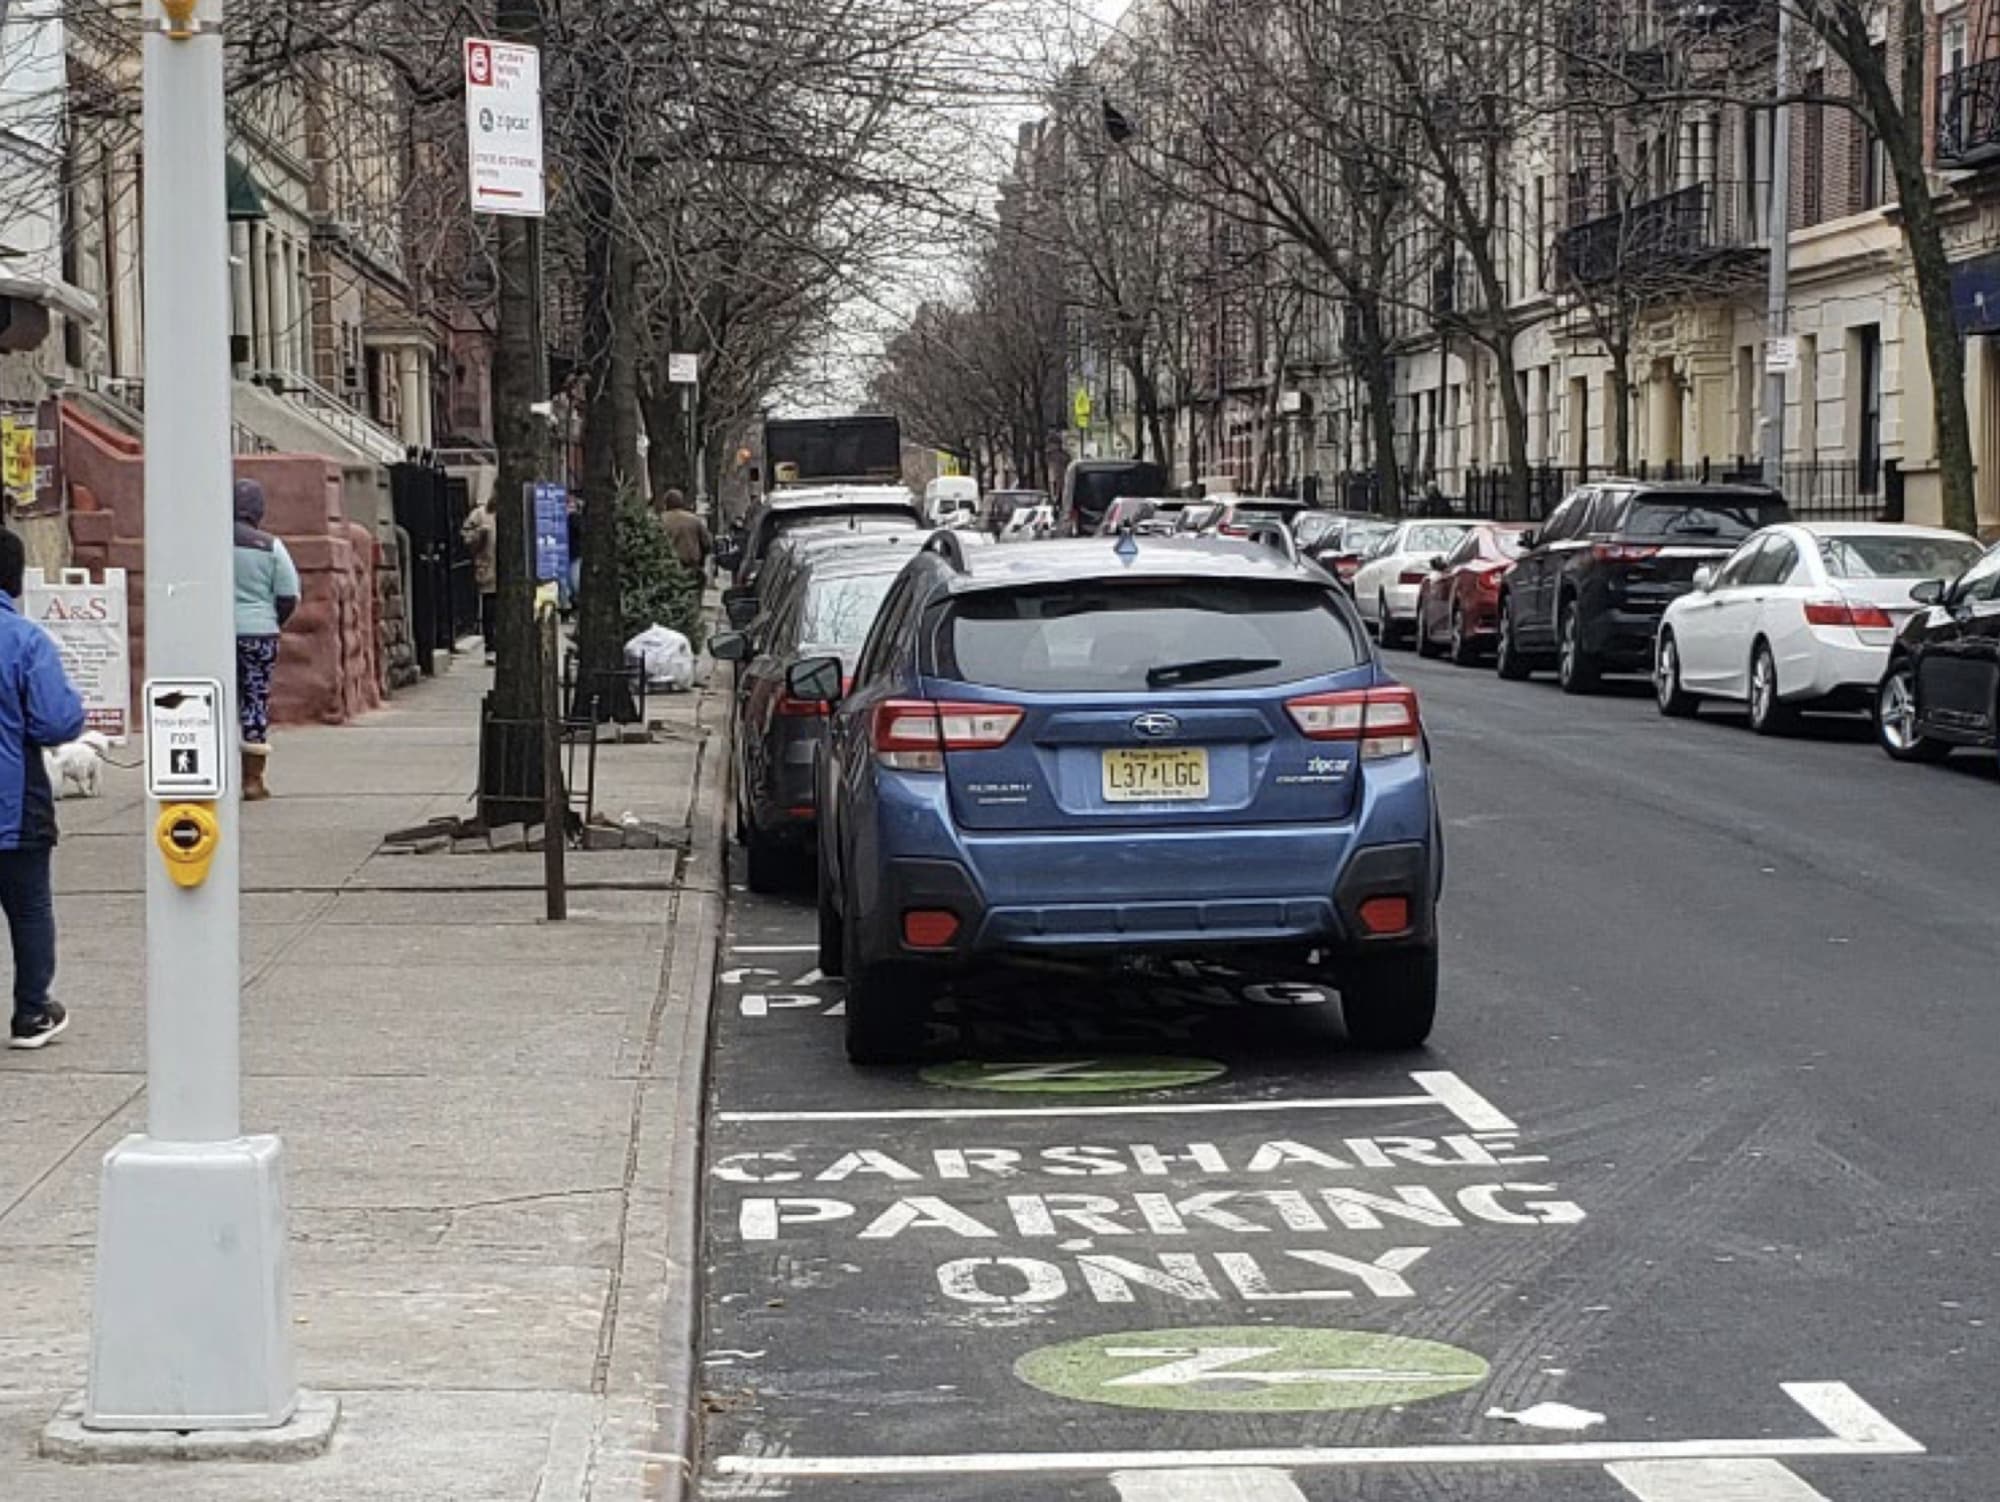 Neighbors blasted DOT's plan to sell parking space to Getaround for $237 per car per spot | NYC DOT